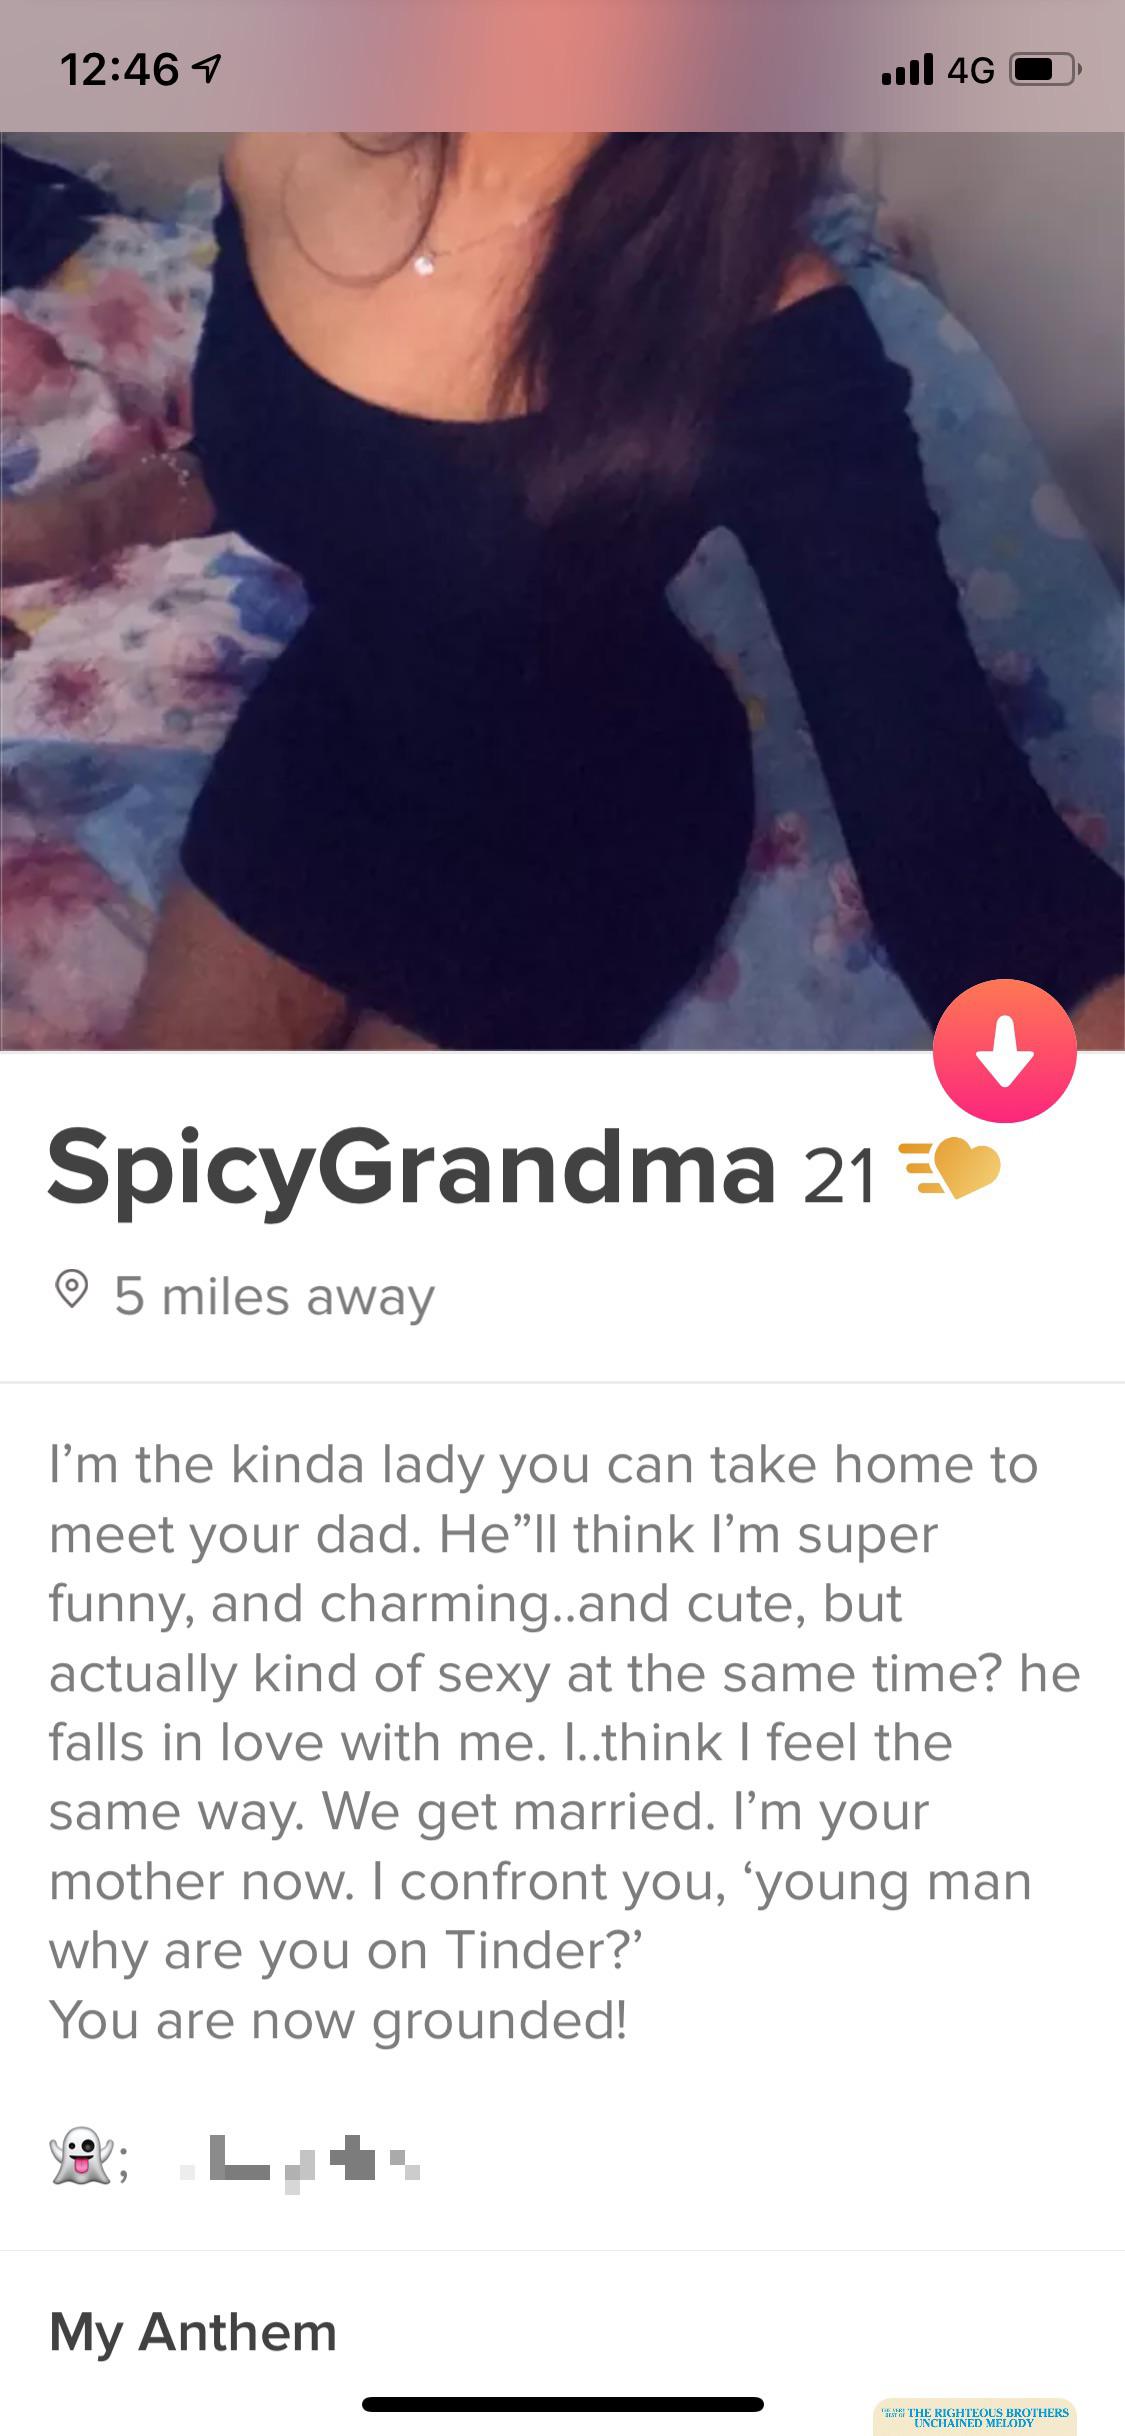 shameless tinder - I'm the kinda lady you can take home to meet your dad. Hell think I'm super funny, and charming..and cute, but actually kind of sexy at the same time? he falls in love with me. I..think I feel the same w